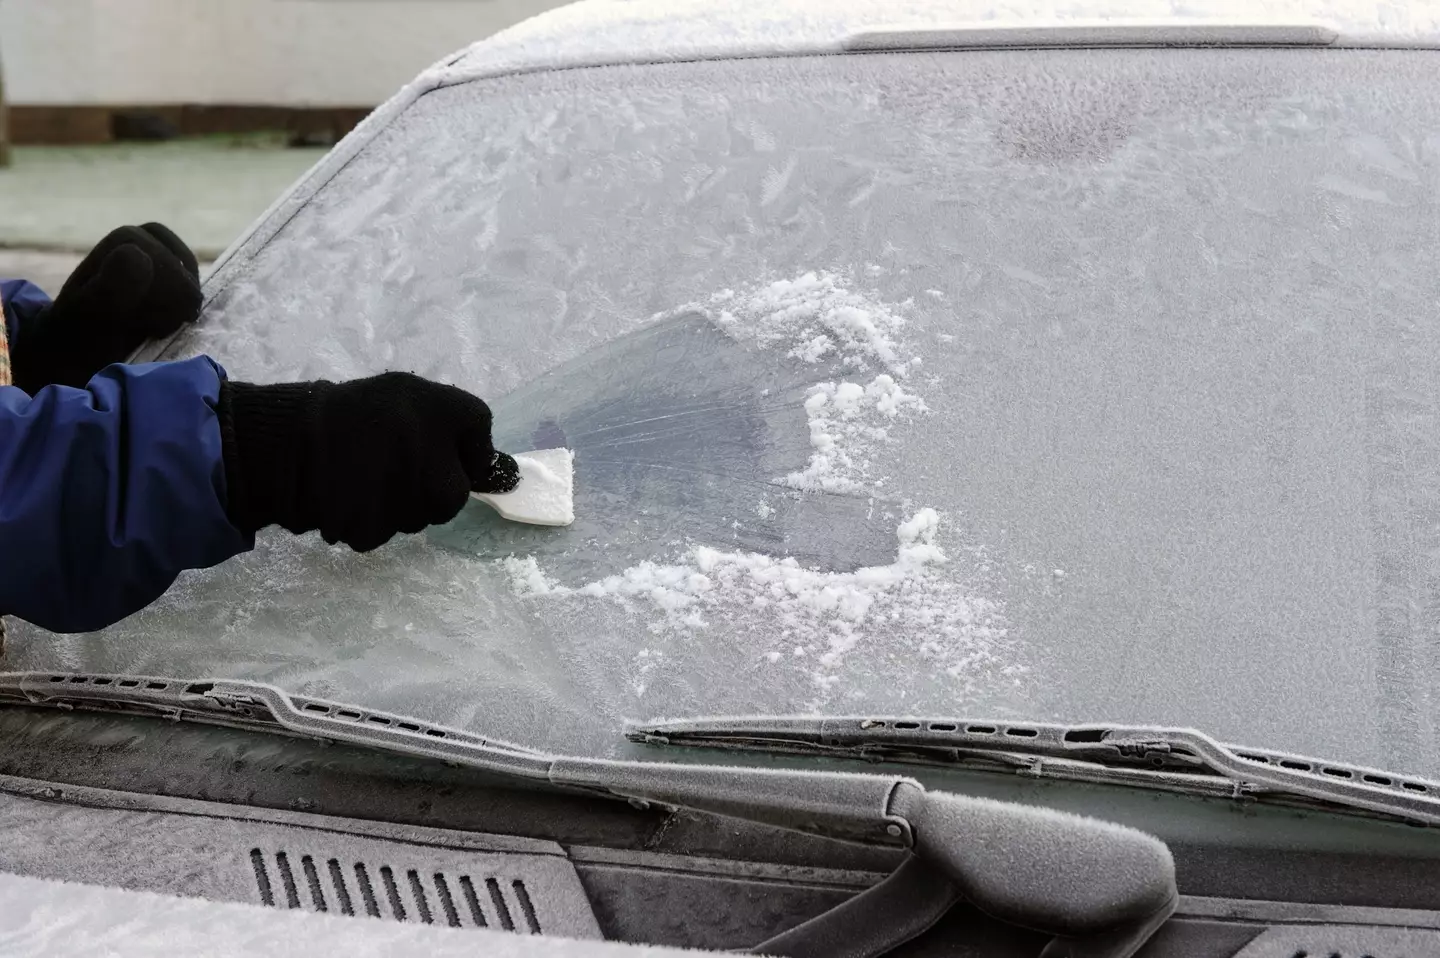 If you don't want to break out the scraper you could use your car's engine to clear the ice, but be careful.